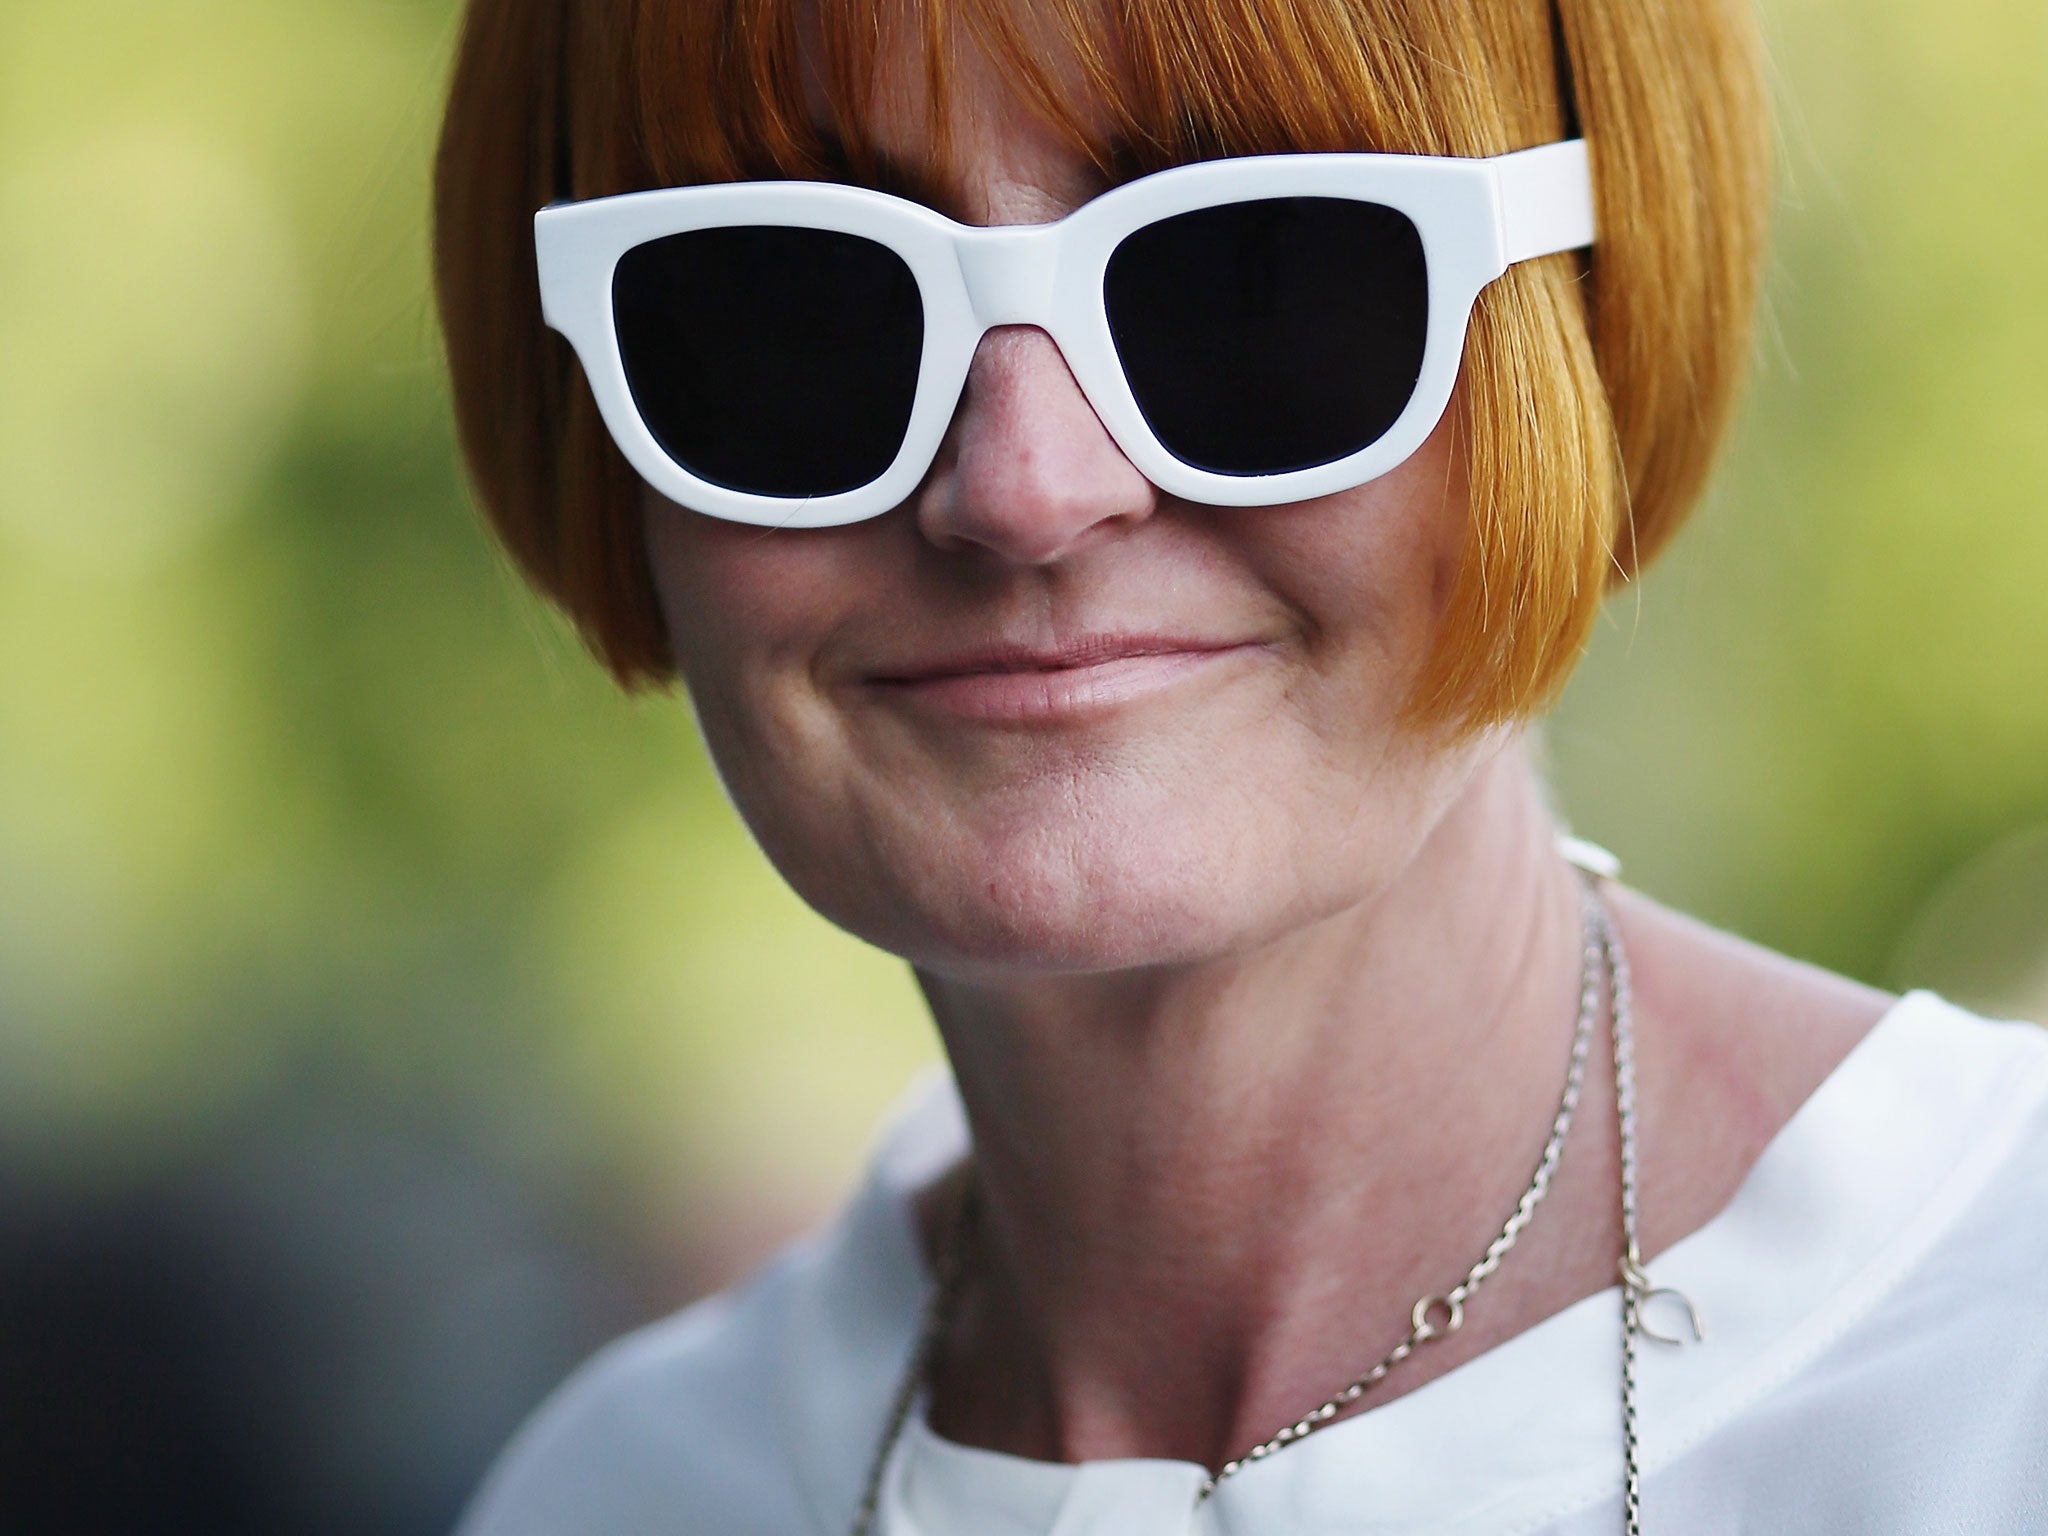 Mary Portas poses for a picture outside Portcullis House on September 2, 2013 in London, England.